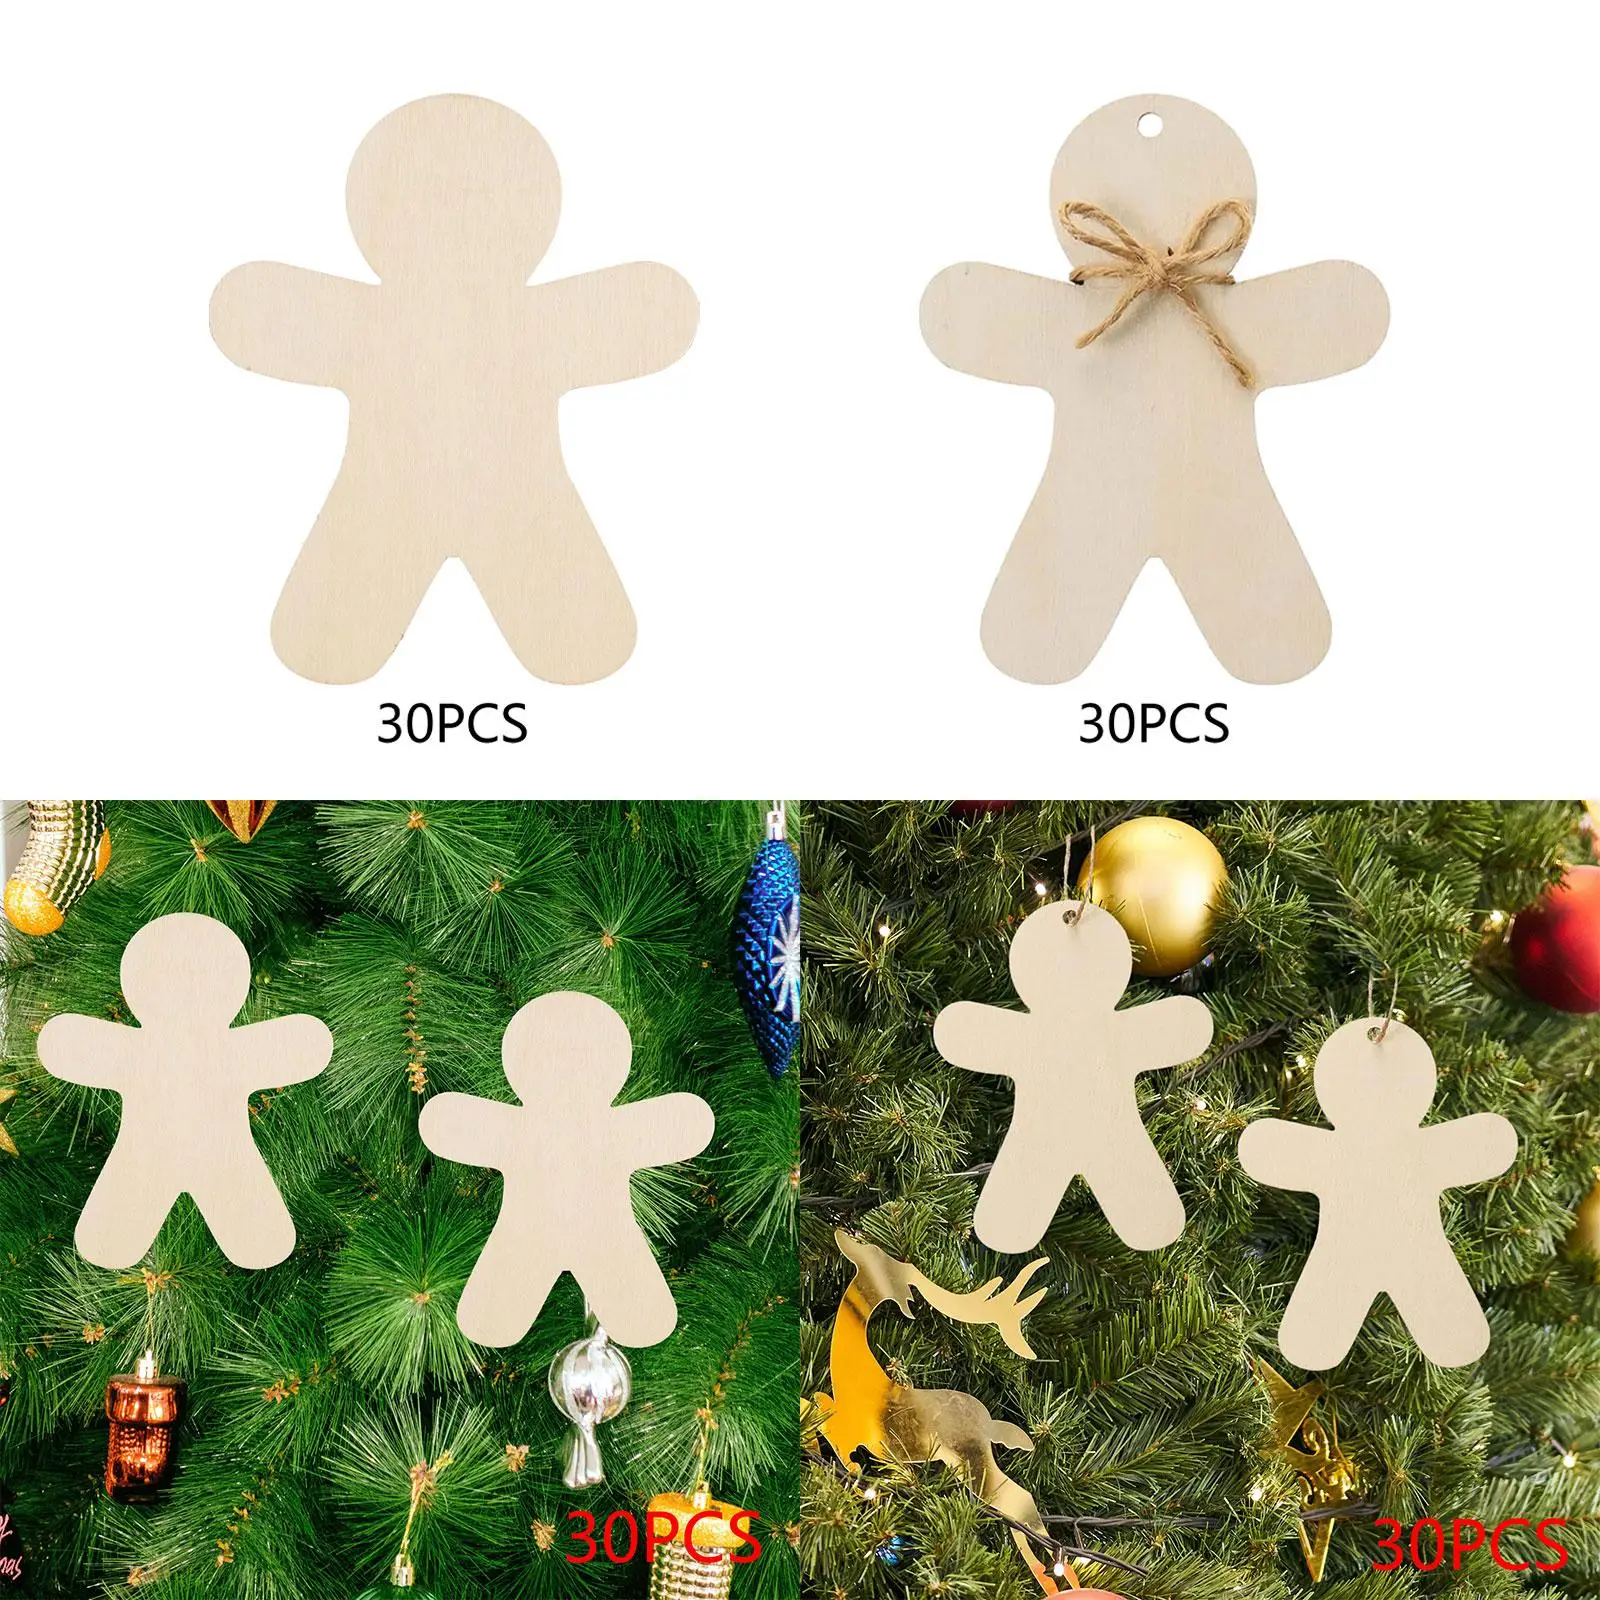 30Pcs Unpainted Gingerbread Man Slices for Wedding Christmas Scrapbooking